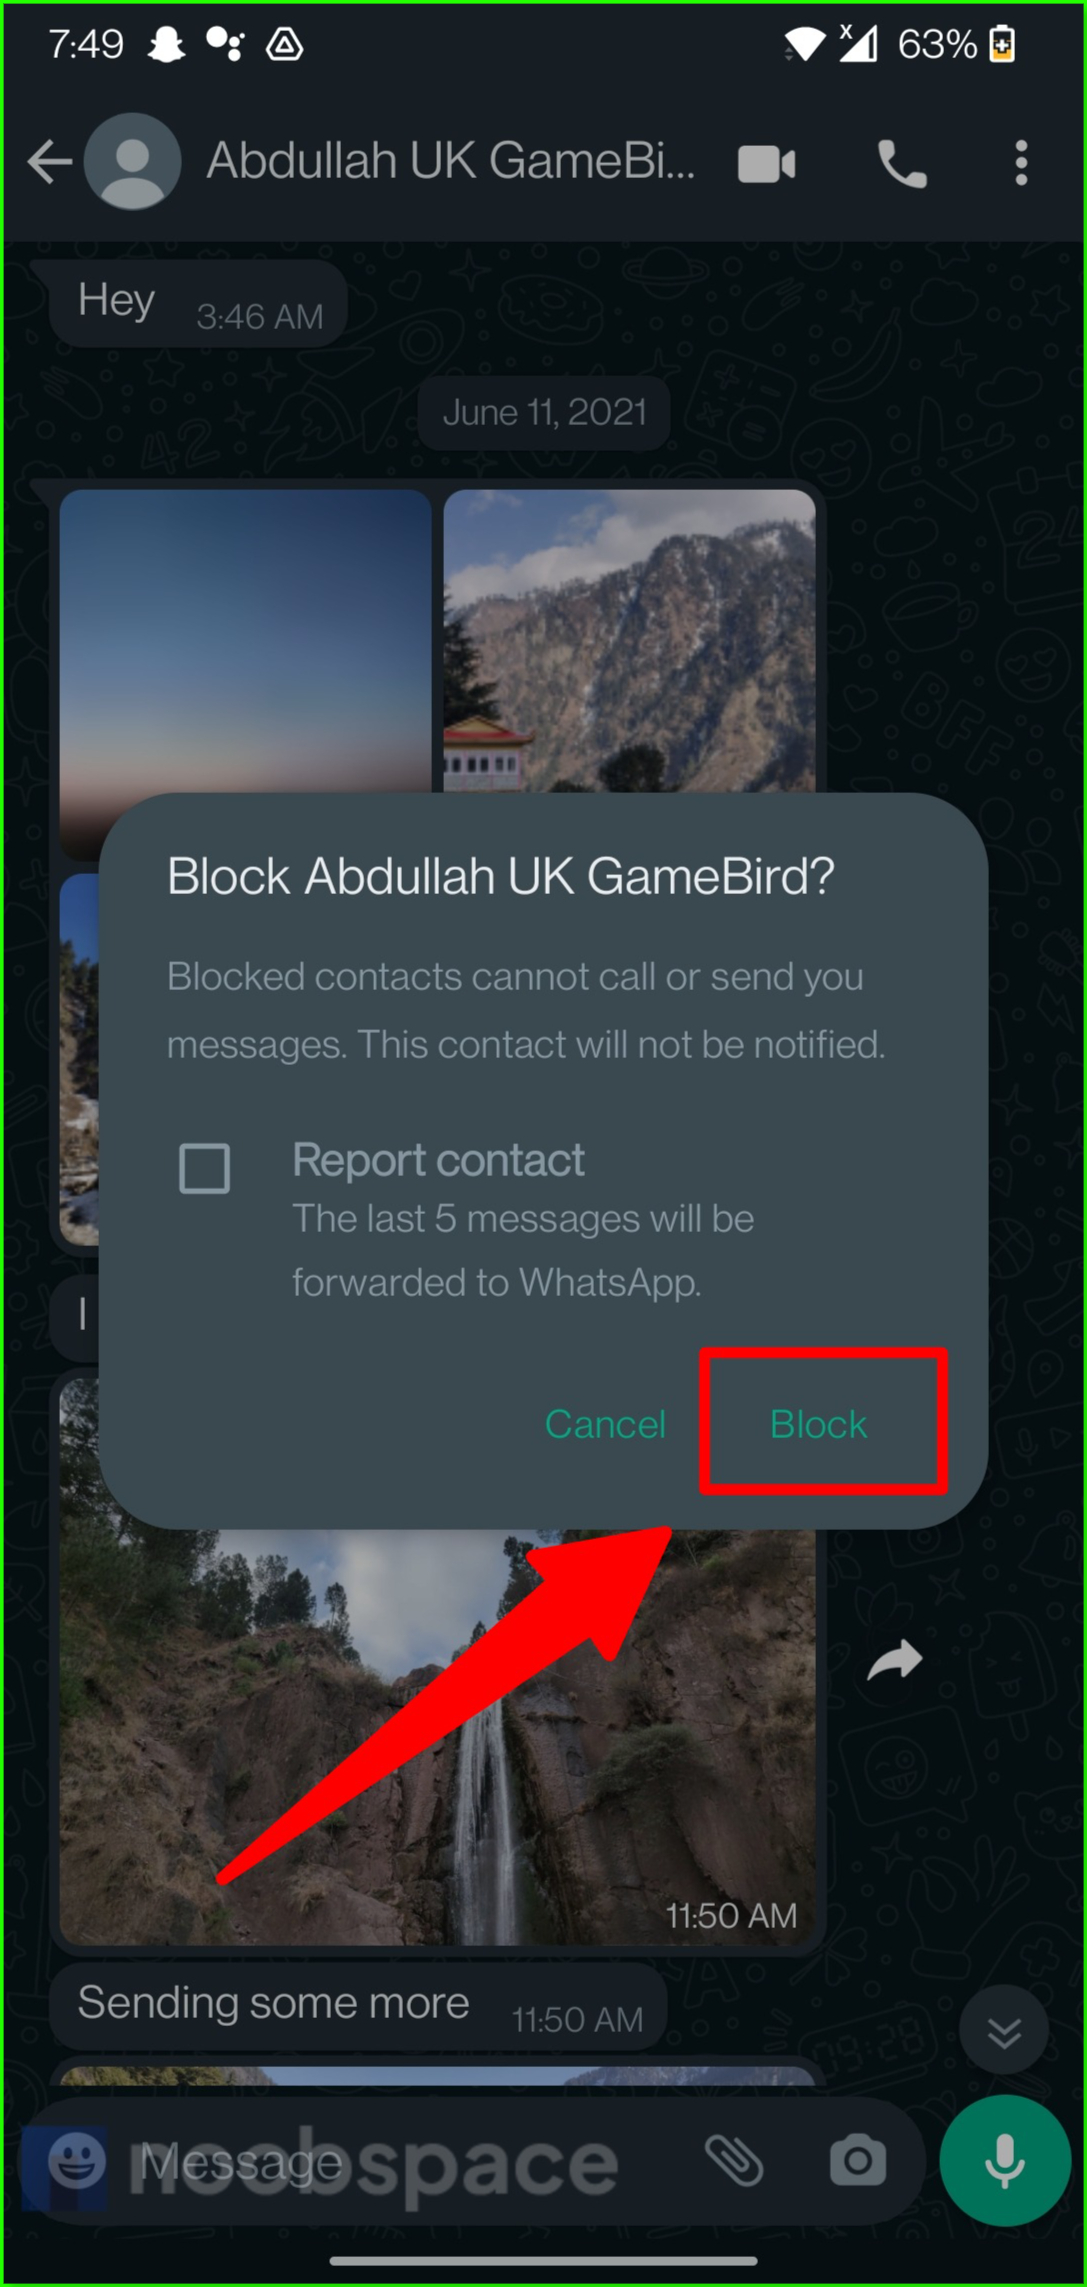 Tap block in the pop-up to finally block that person